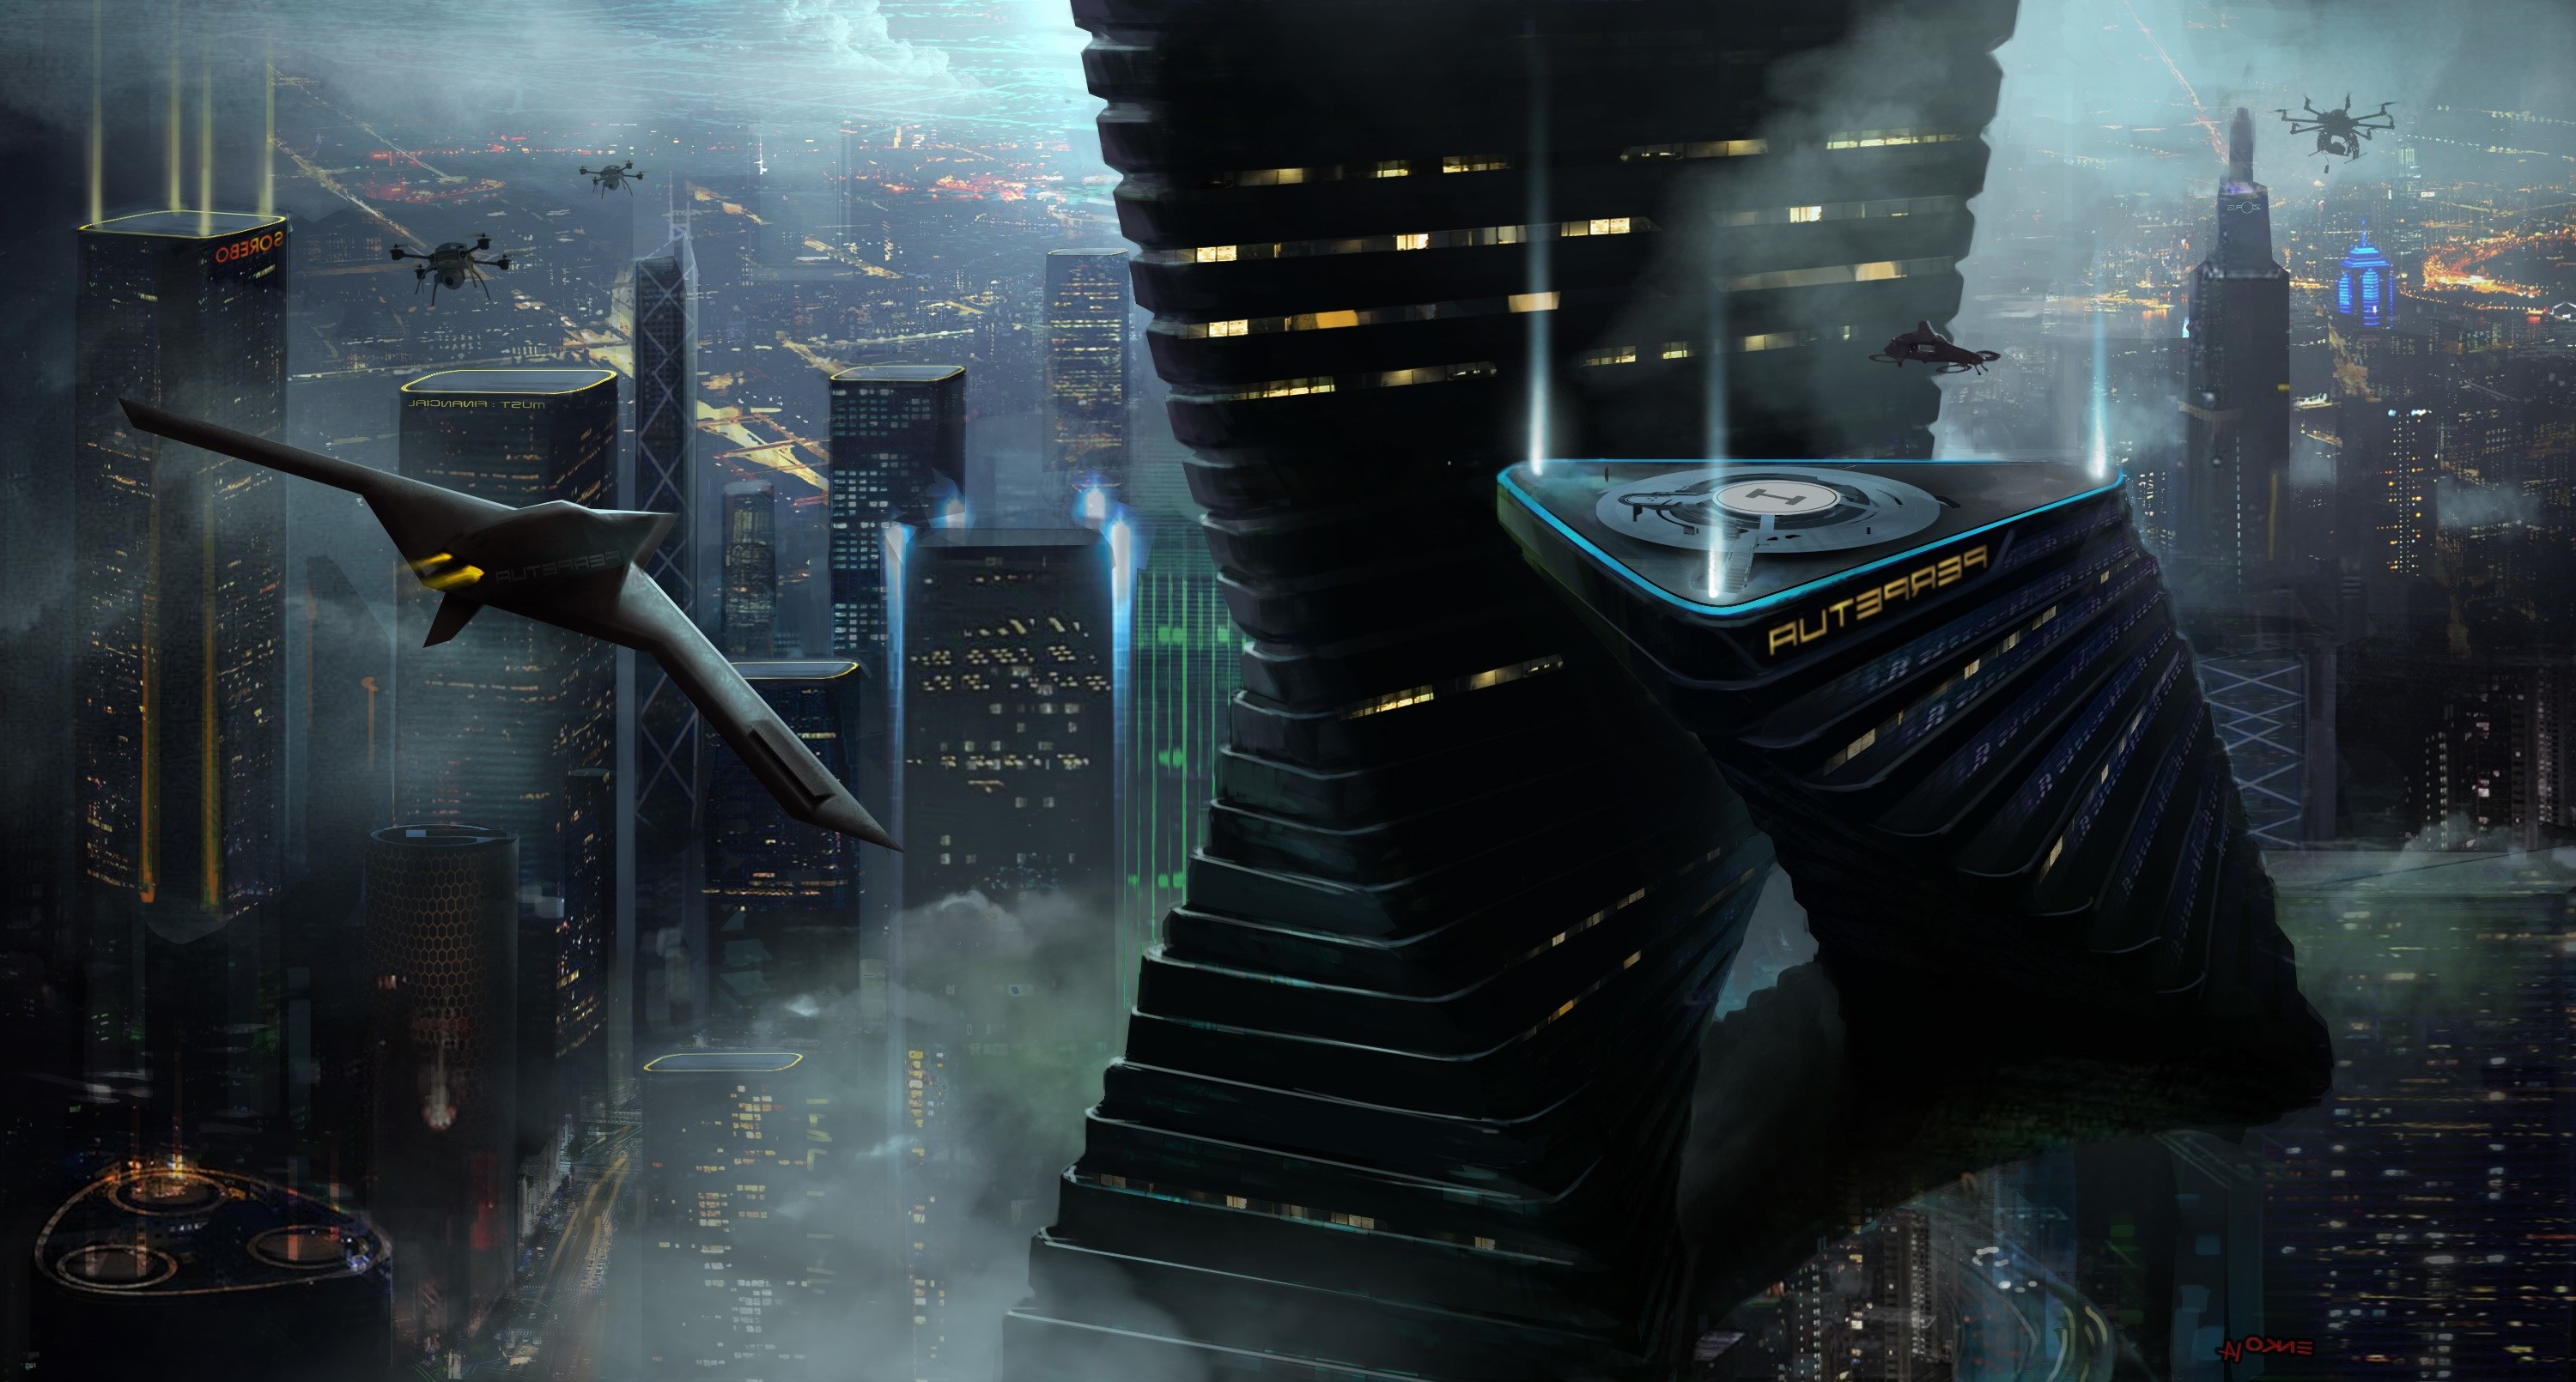 fantasy Art, Digital Art, Drawing, Cityscape, Airplane, Skyscraper,  Building, Lights, Futuristic Wallpapers HD / Desktop and Mobile Backgrounds